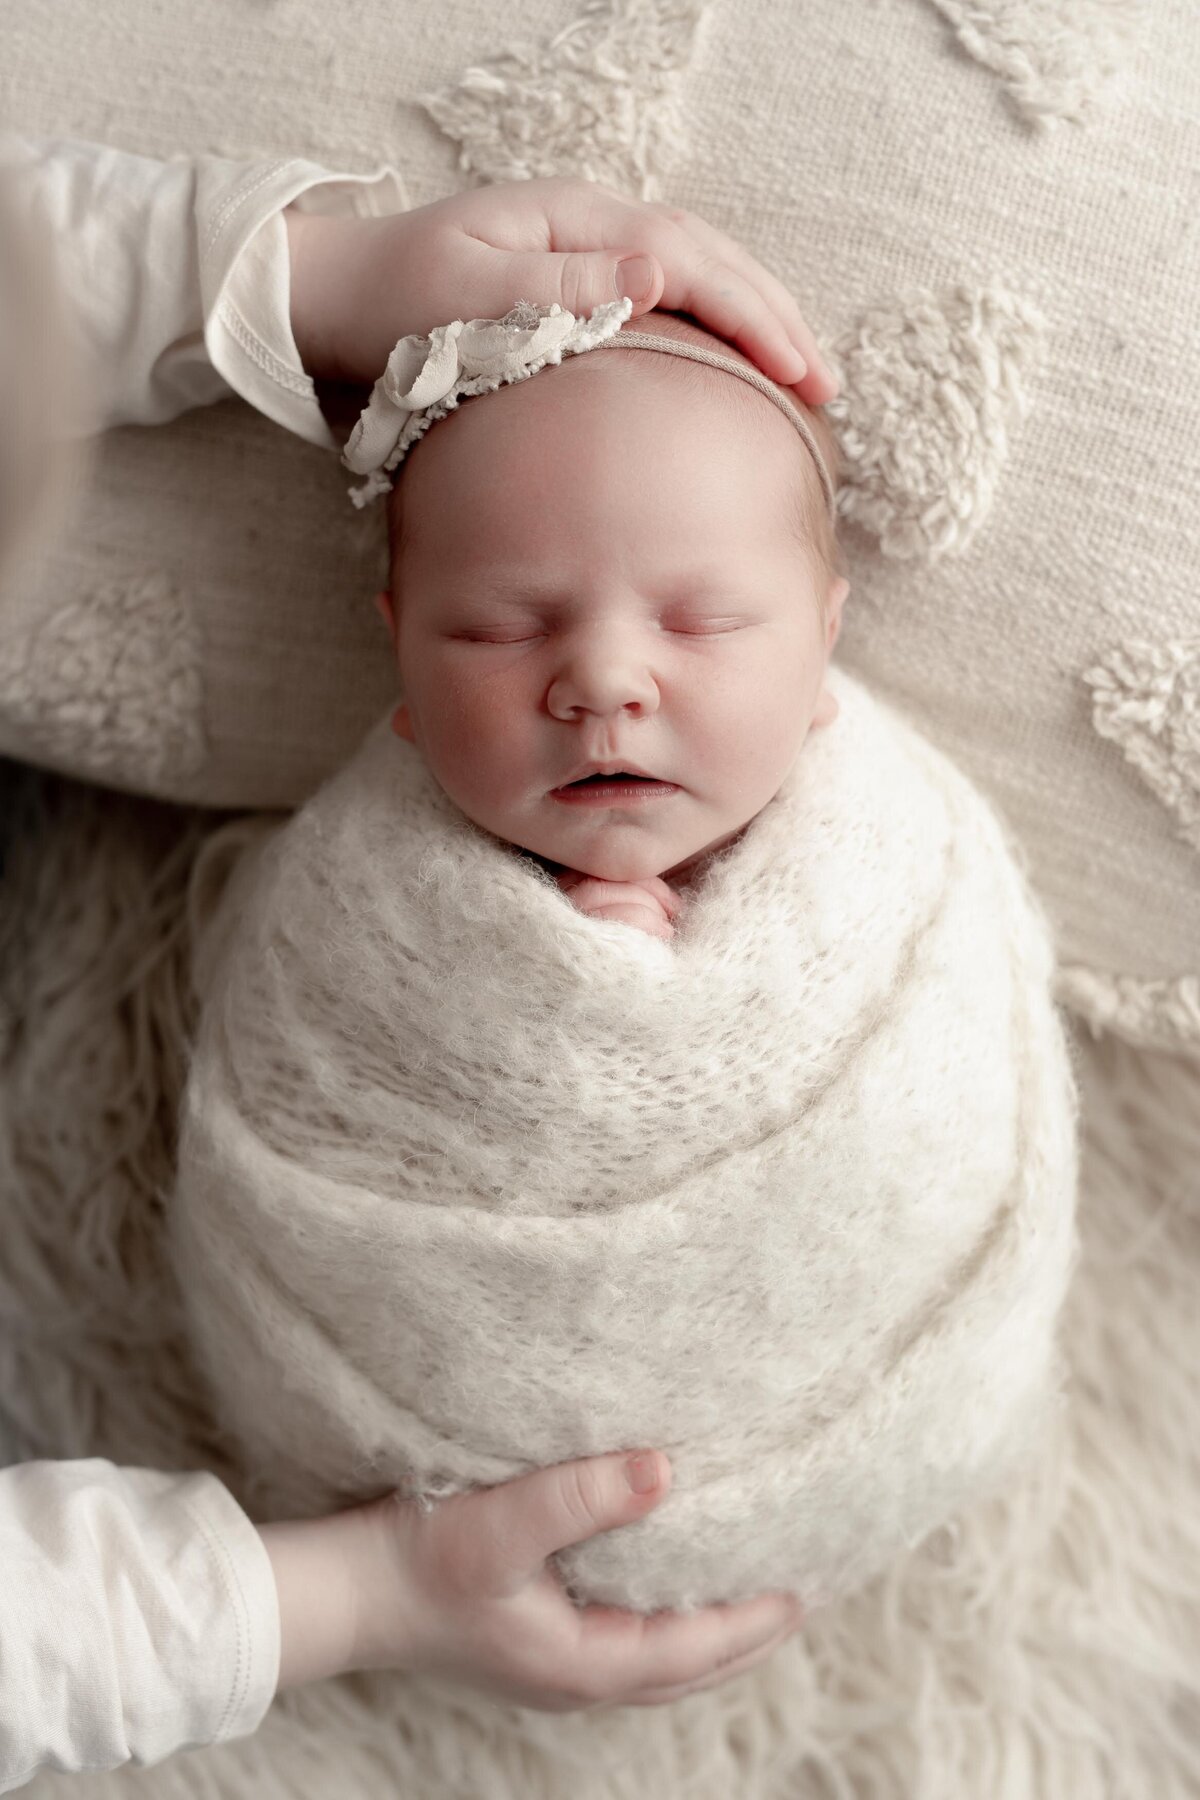 Studio newborn photography - baby in cream kit swaddle waring a  delicate headband with petite fabric flowers. Big sisters hands are resting at the bottom of the wrap and the top of their head to show the difference in scale.